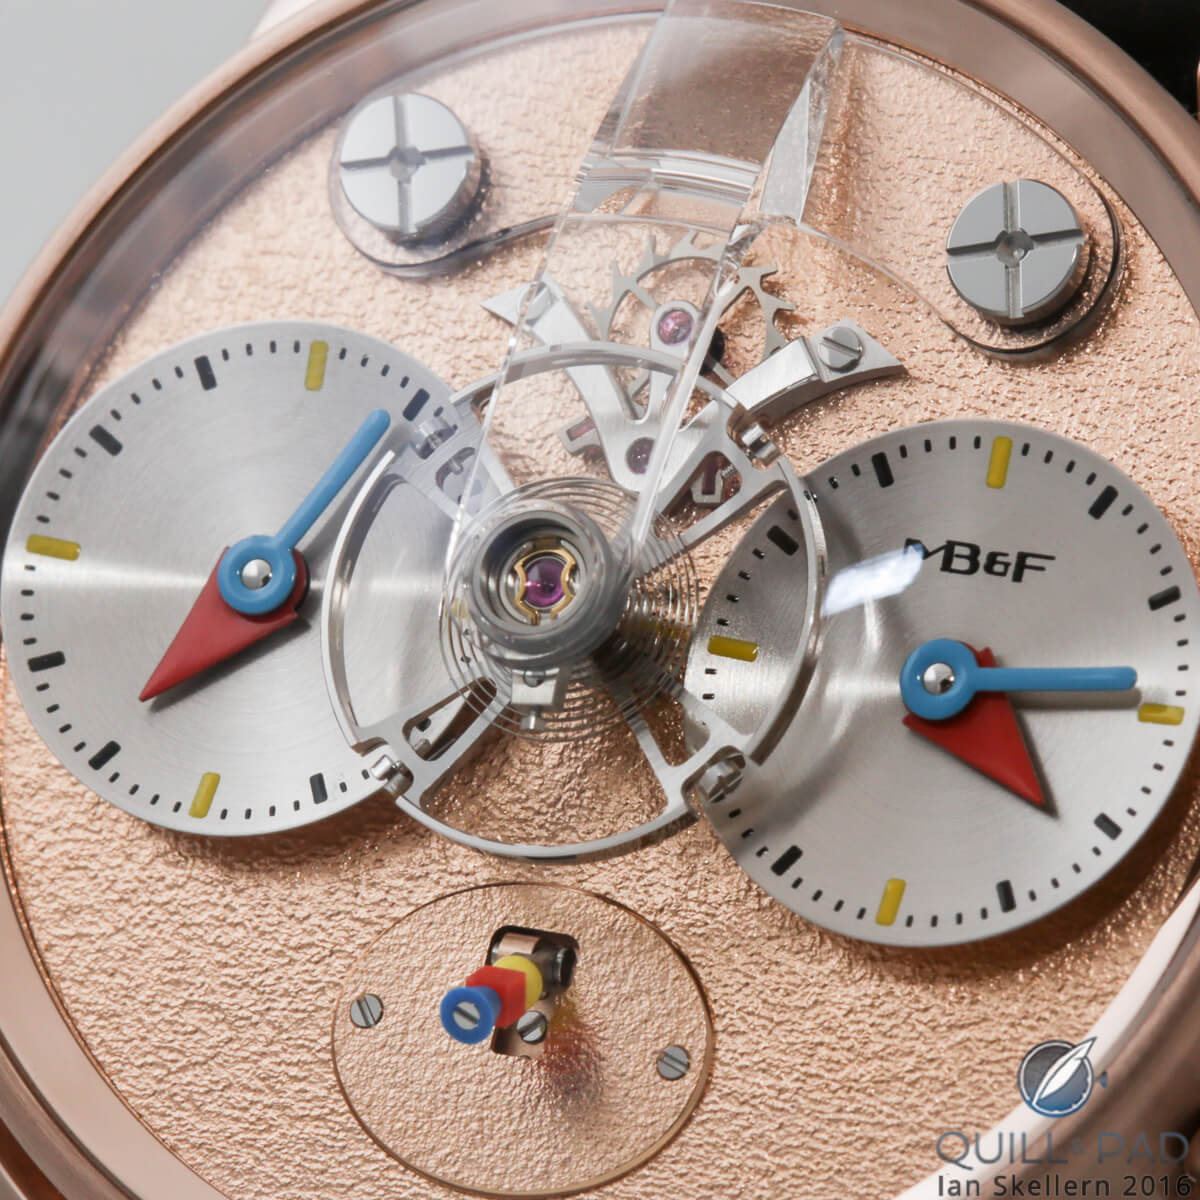 A close look at the dial side of the MB&F LM1 Silberstein in red gold with frosted 